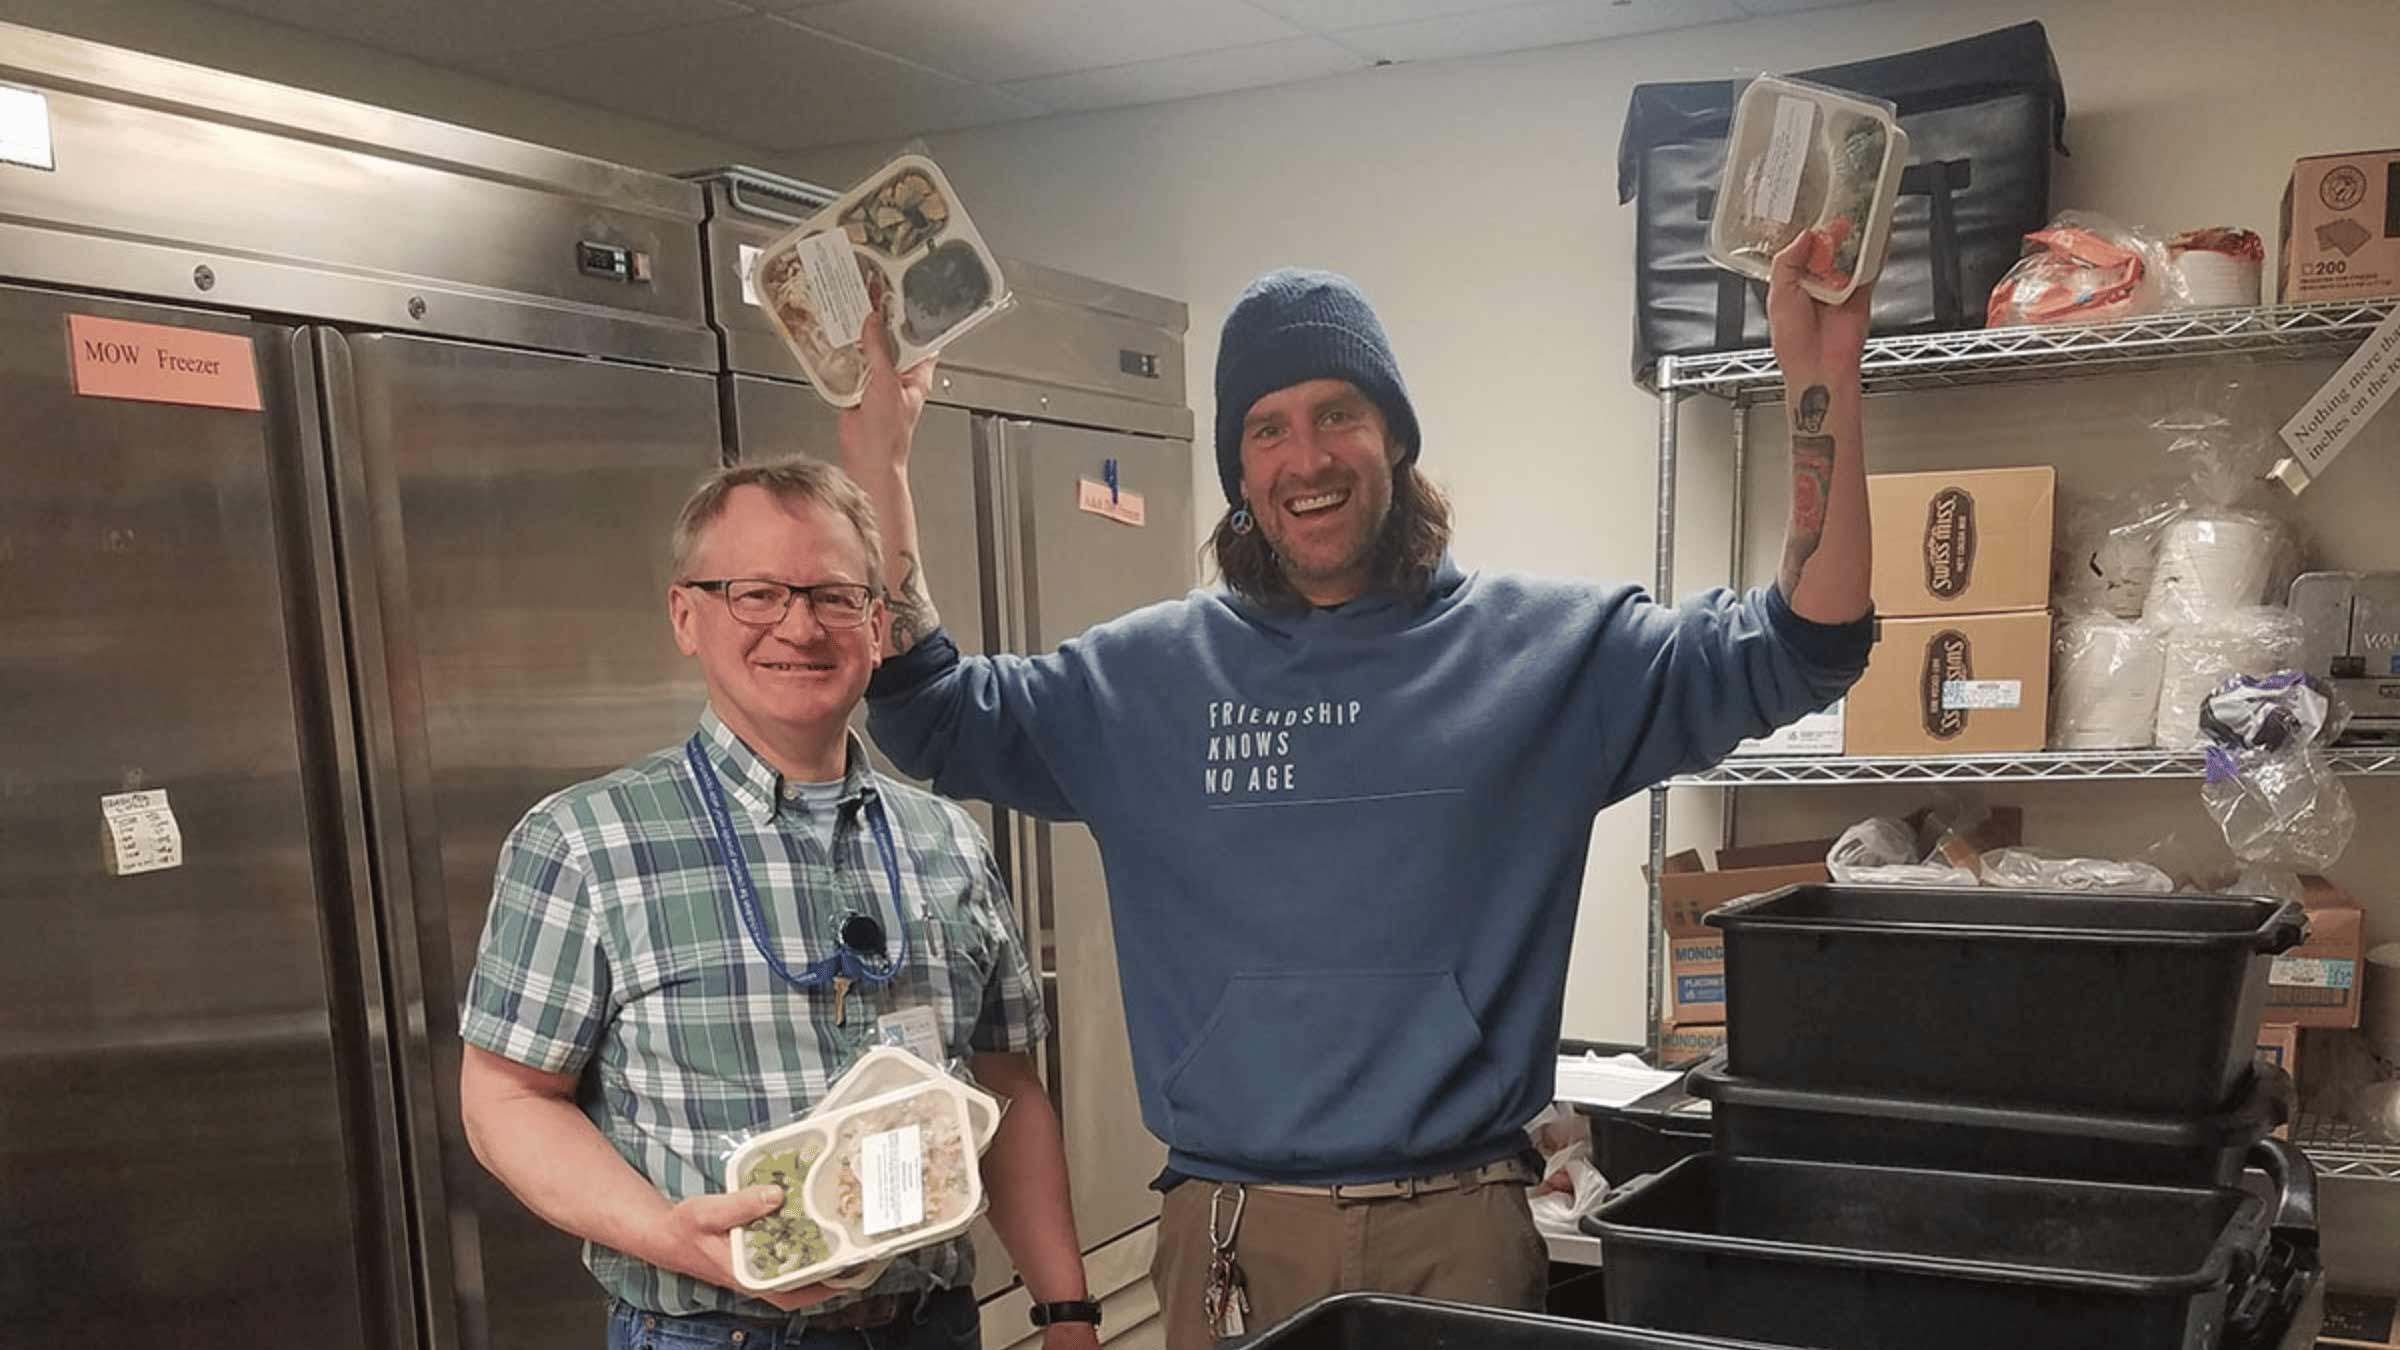 Two people stand in a kitchen holding up meal packages and smiling